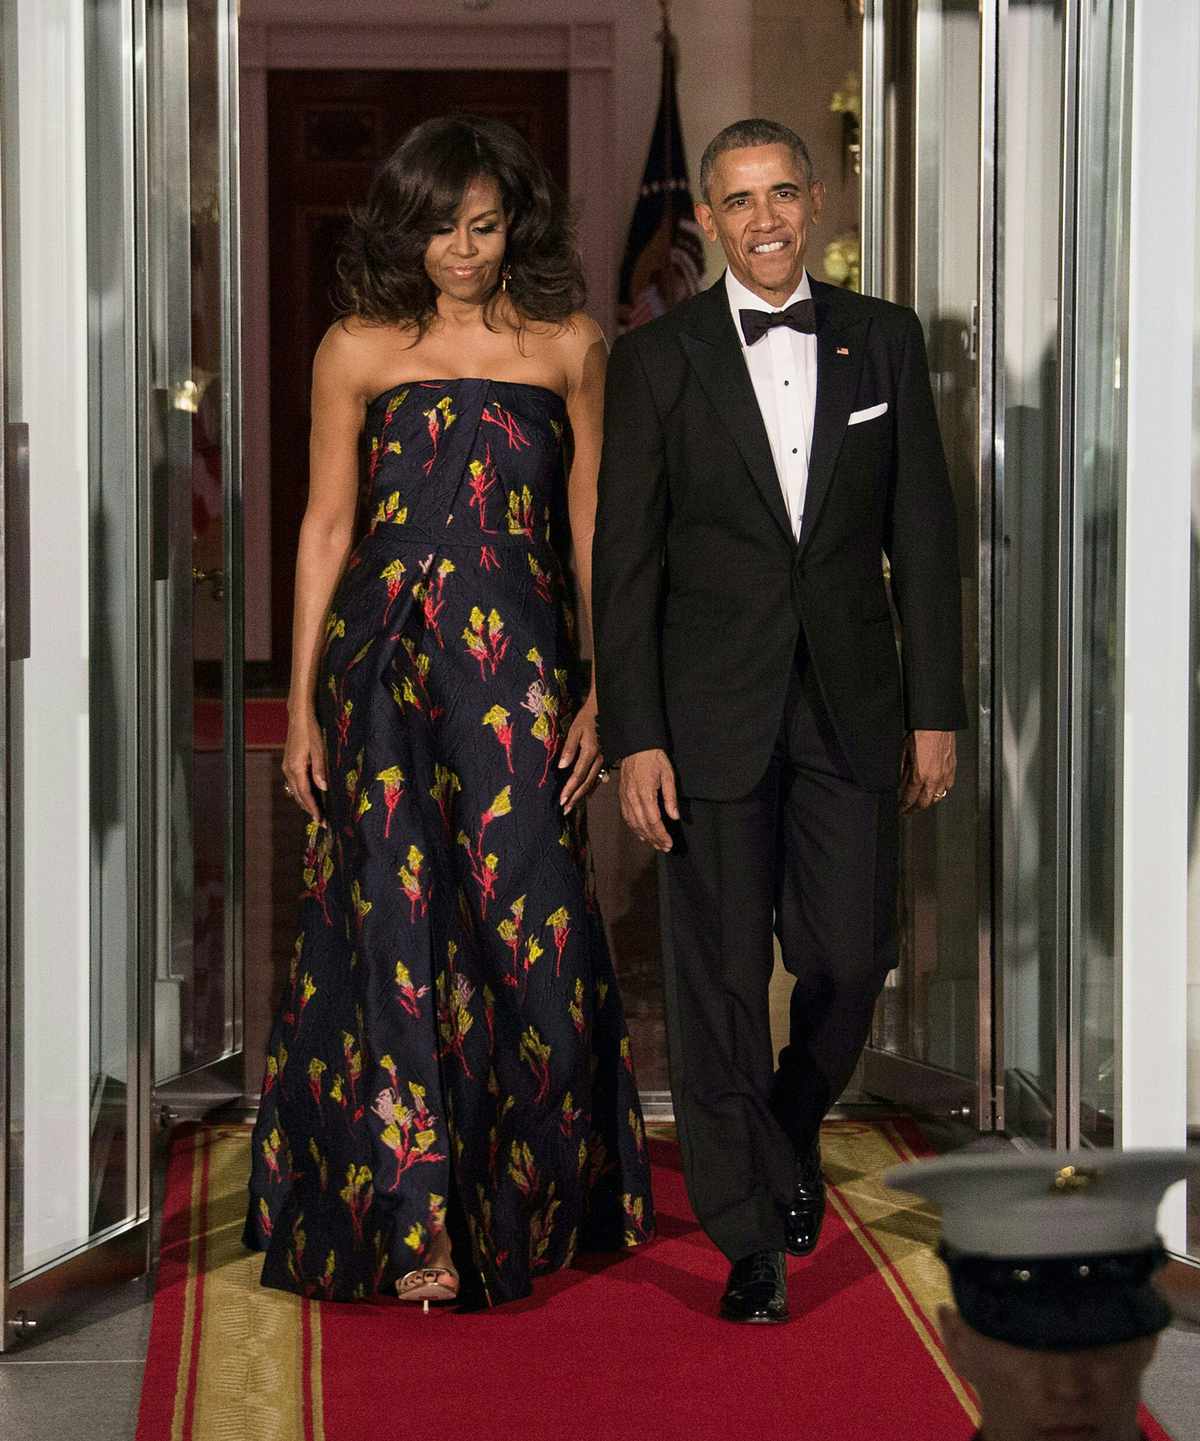 US President Barack Obama and First Lady Michelle Obama walk out to greet Canadian Prime Minister Justin Trudeau and his wife Sophie Gregoire Trudeau for a State Dinner in their honor at the White House in Washington, DC, on March 10, 2016.